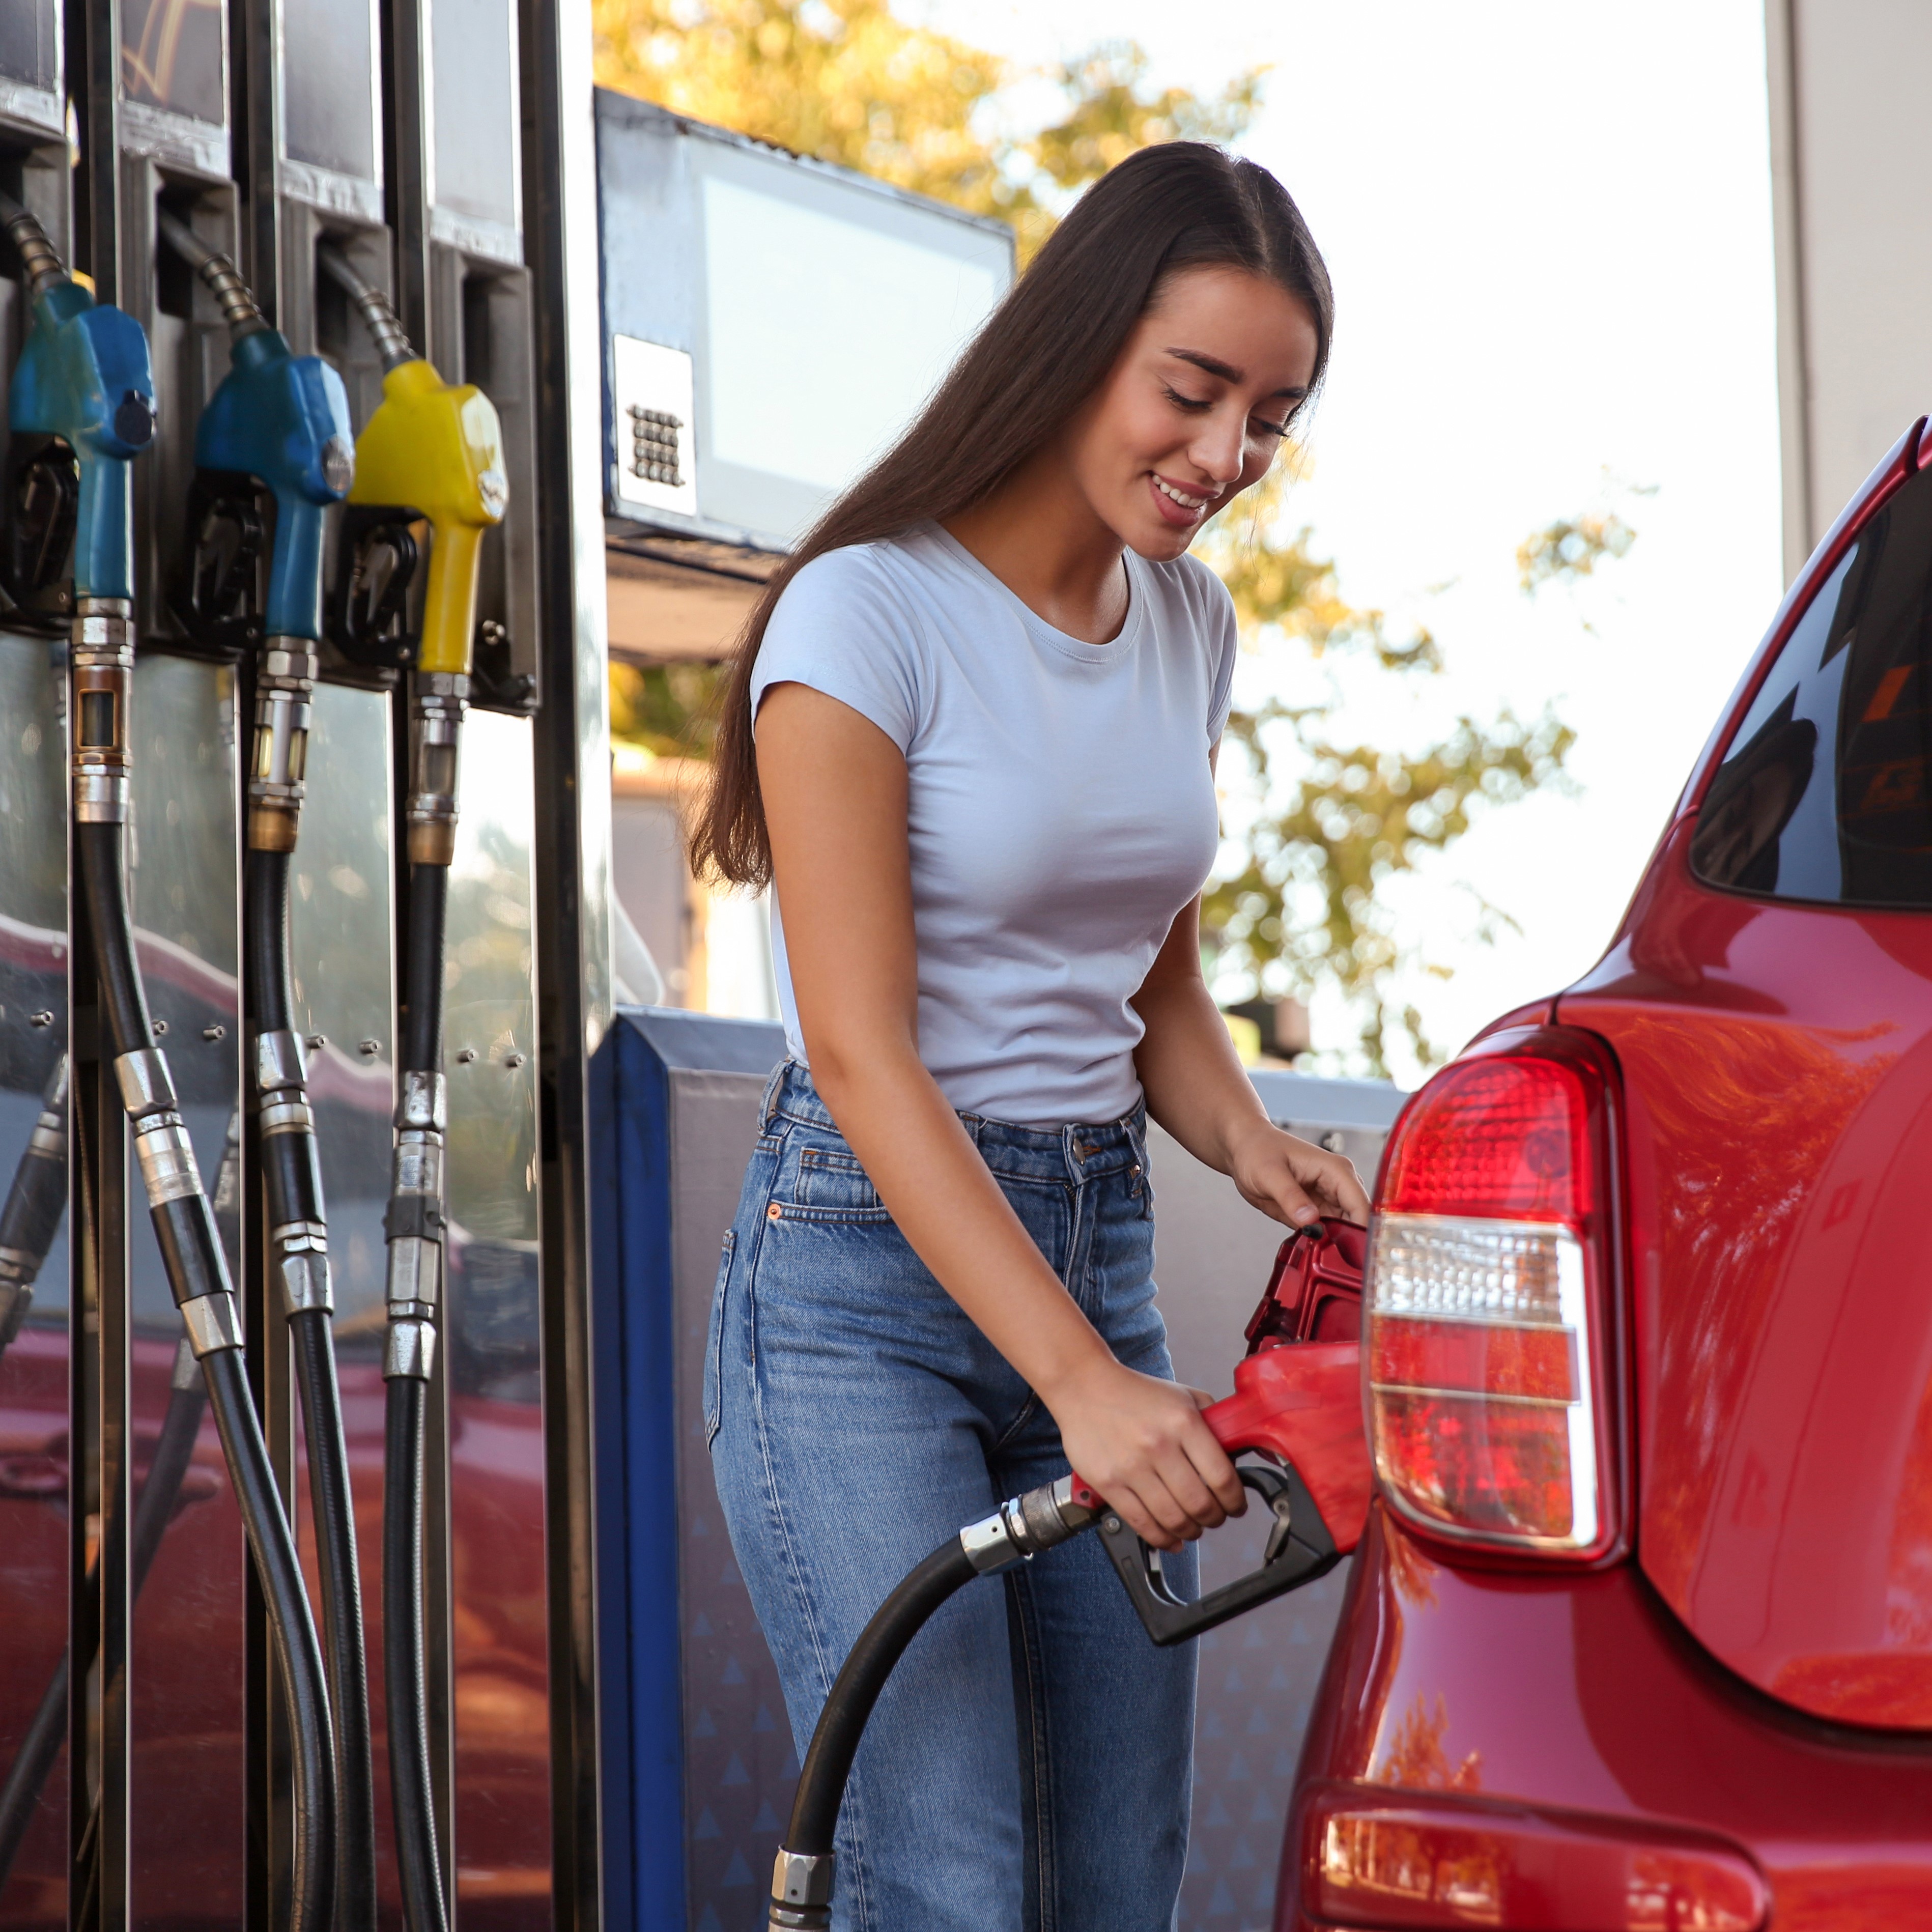 National Average Gas Price Drops with Demand